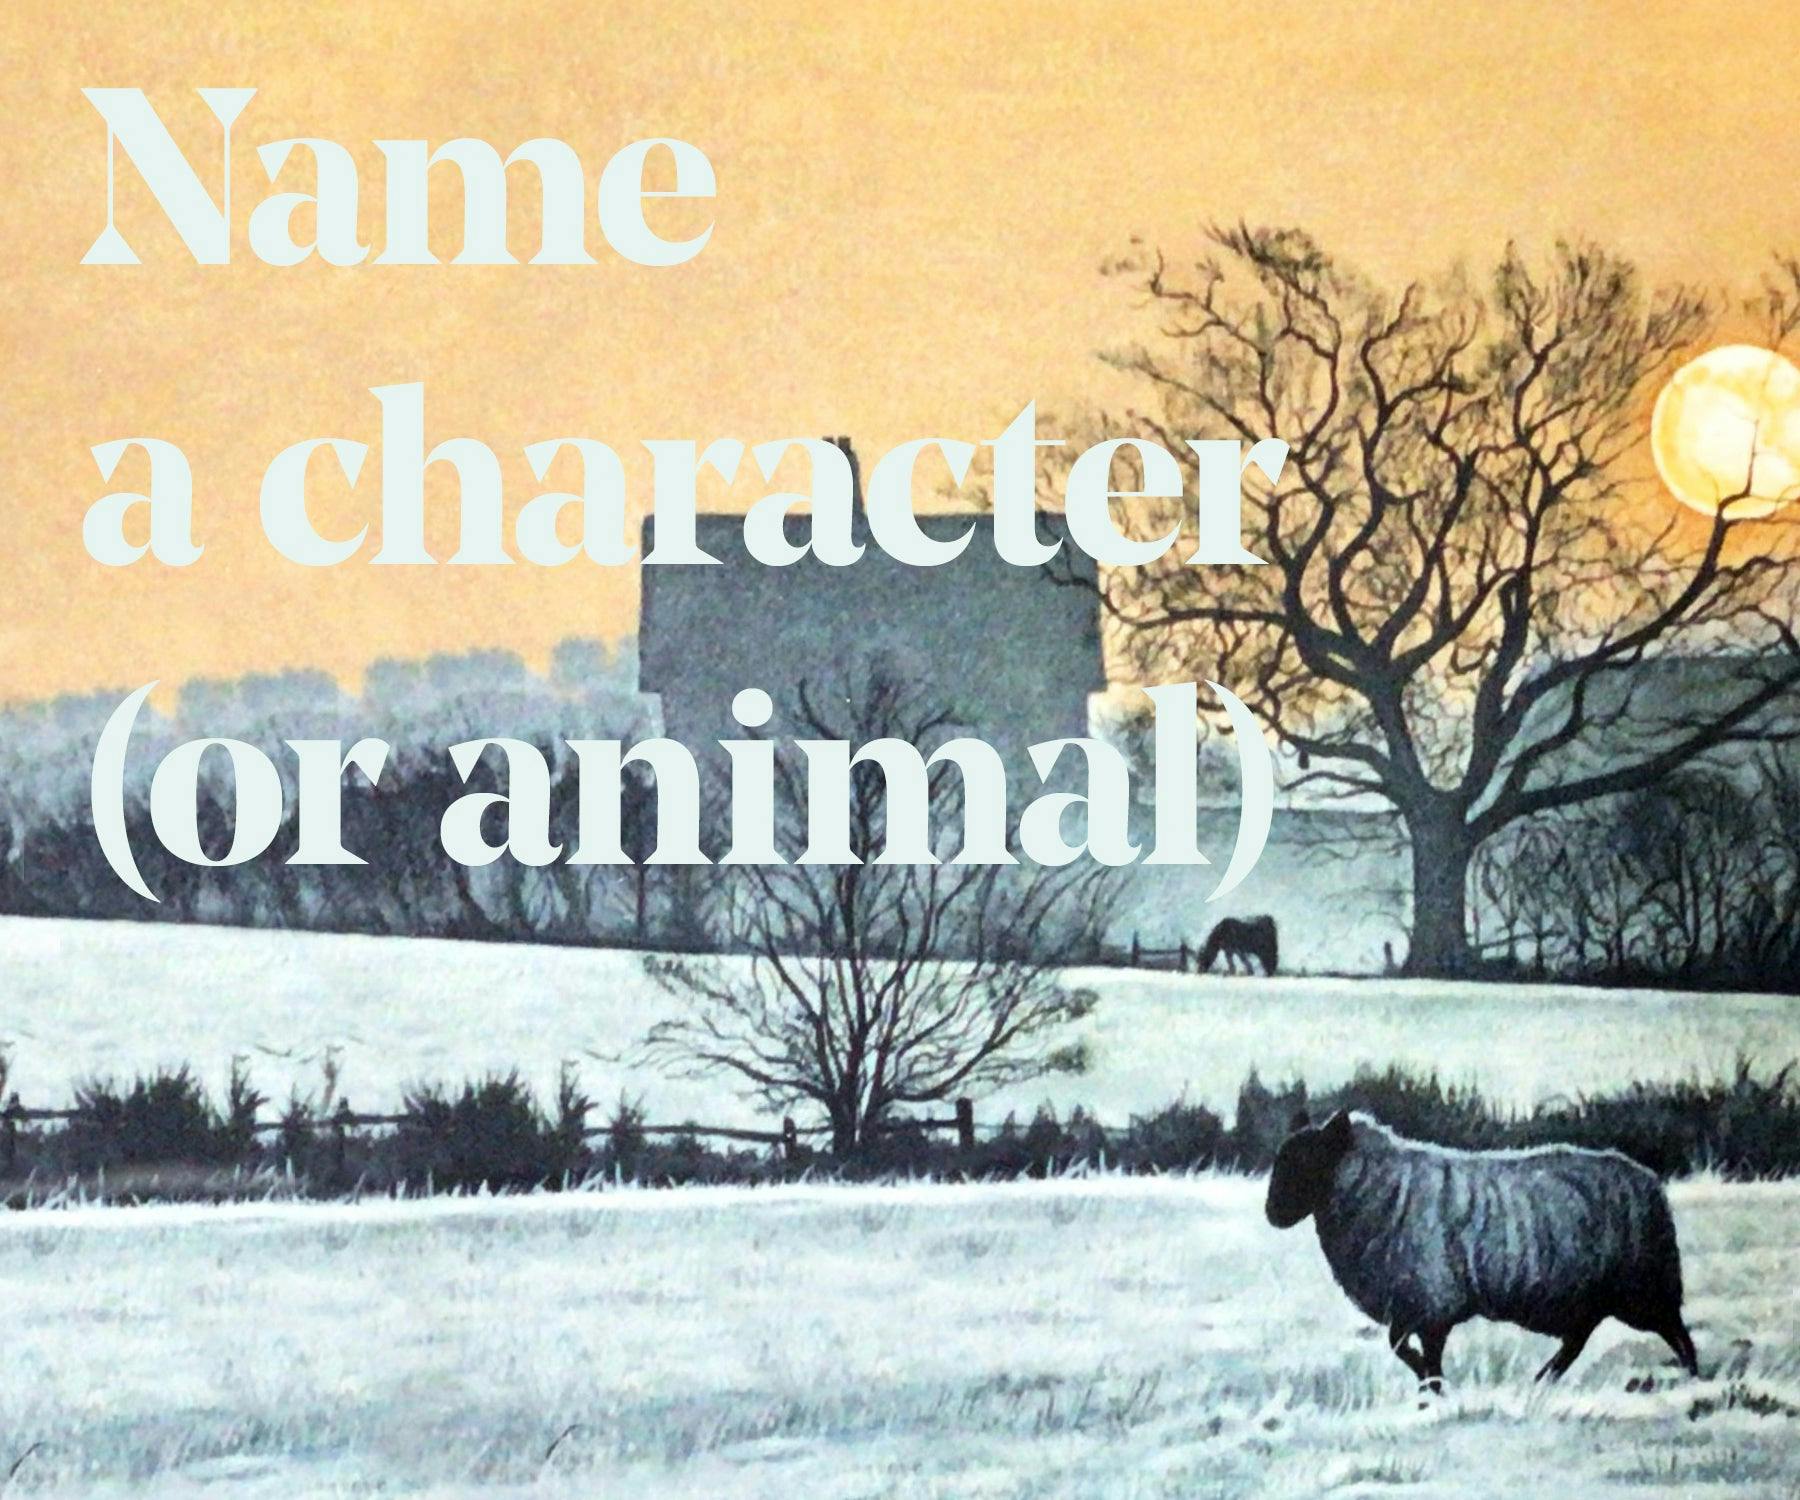 Name a character or animal. (Plus a signed hardback).